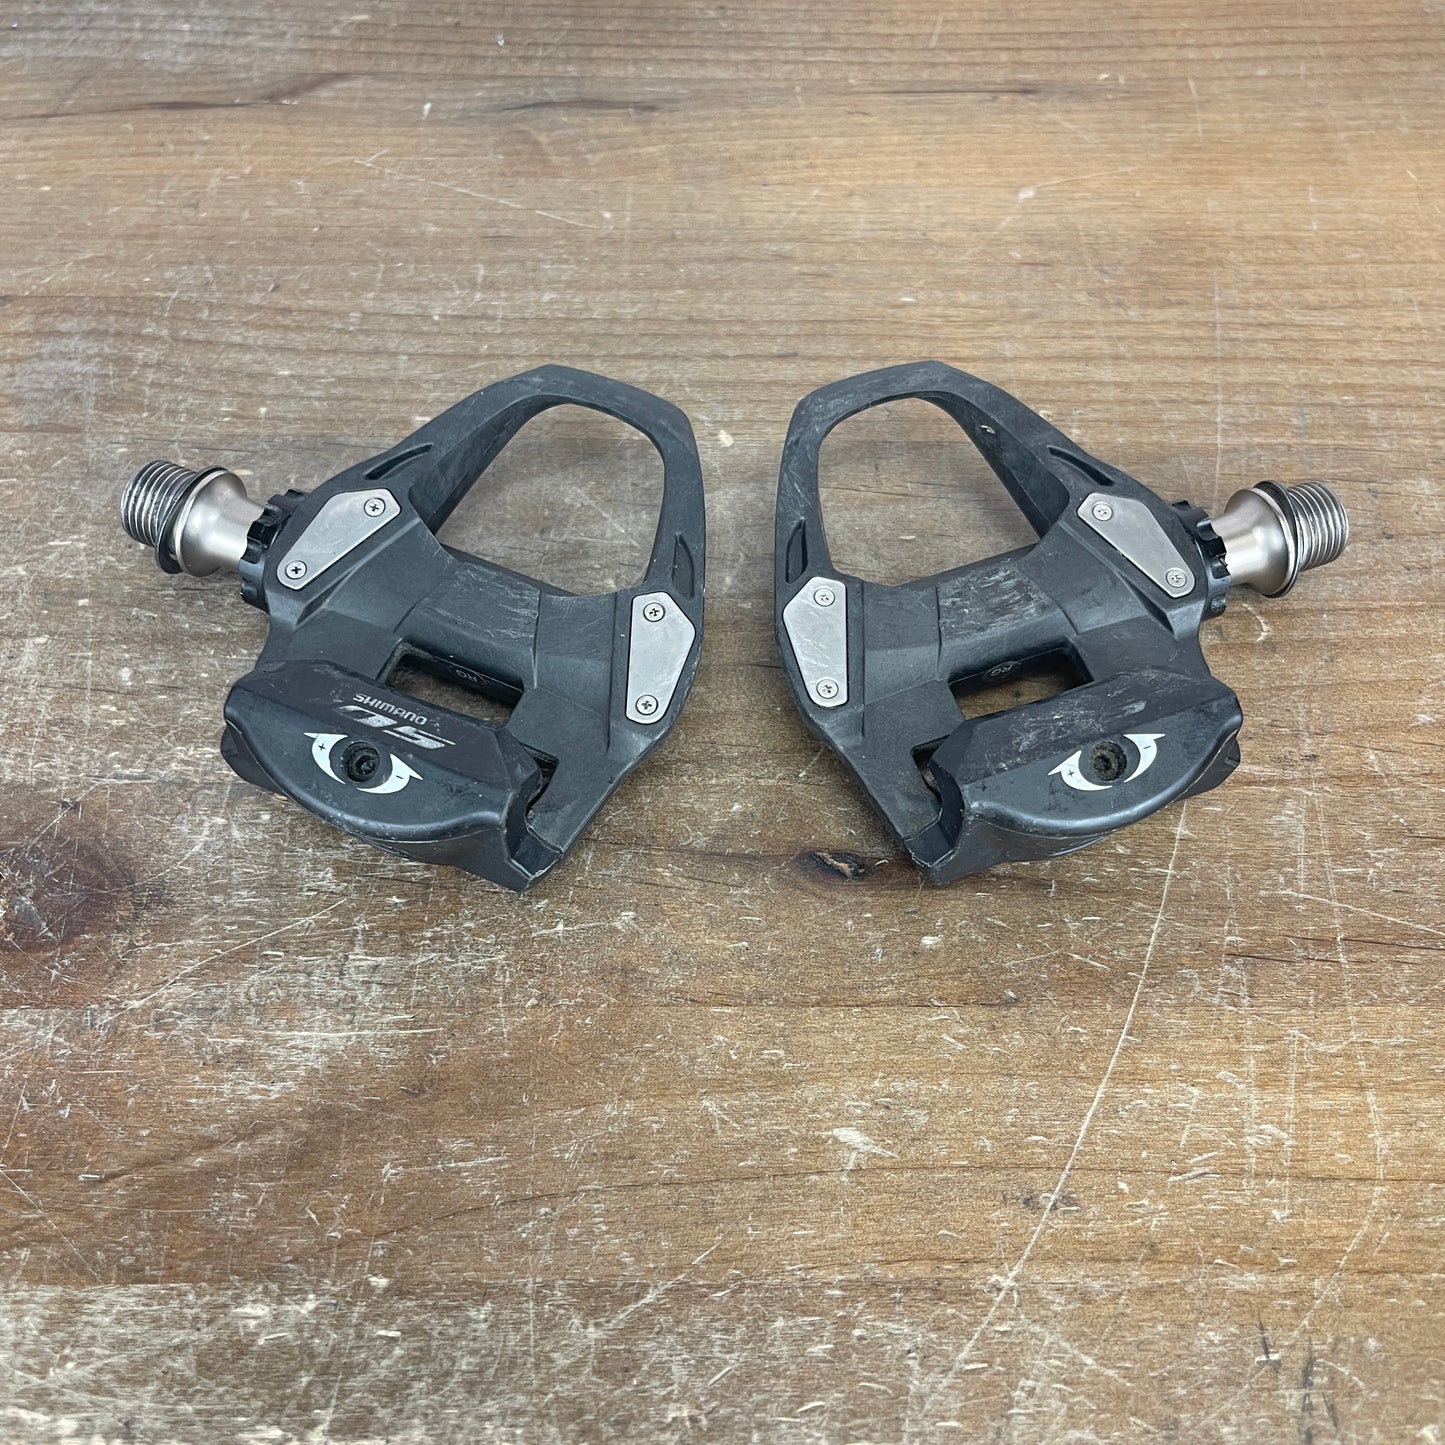 Shimano 105 PD-R7000 Carbon Road Bike Clipless Pedals No Cleats 260g